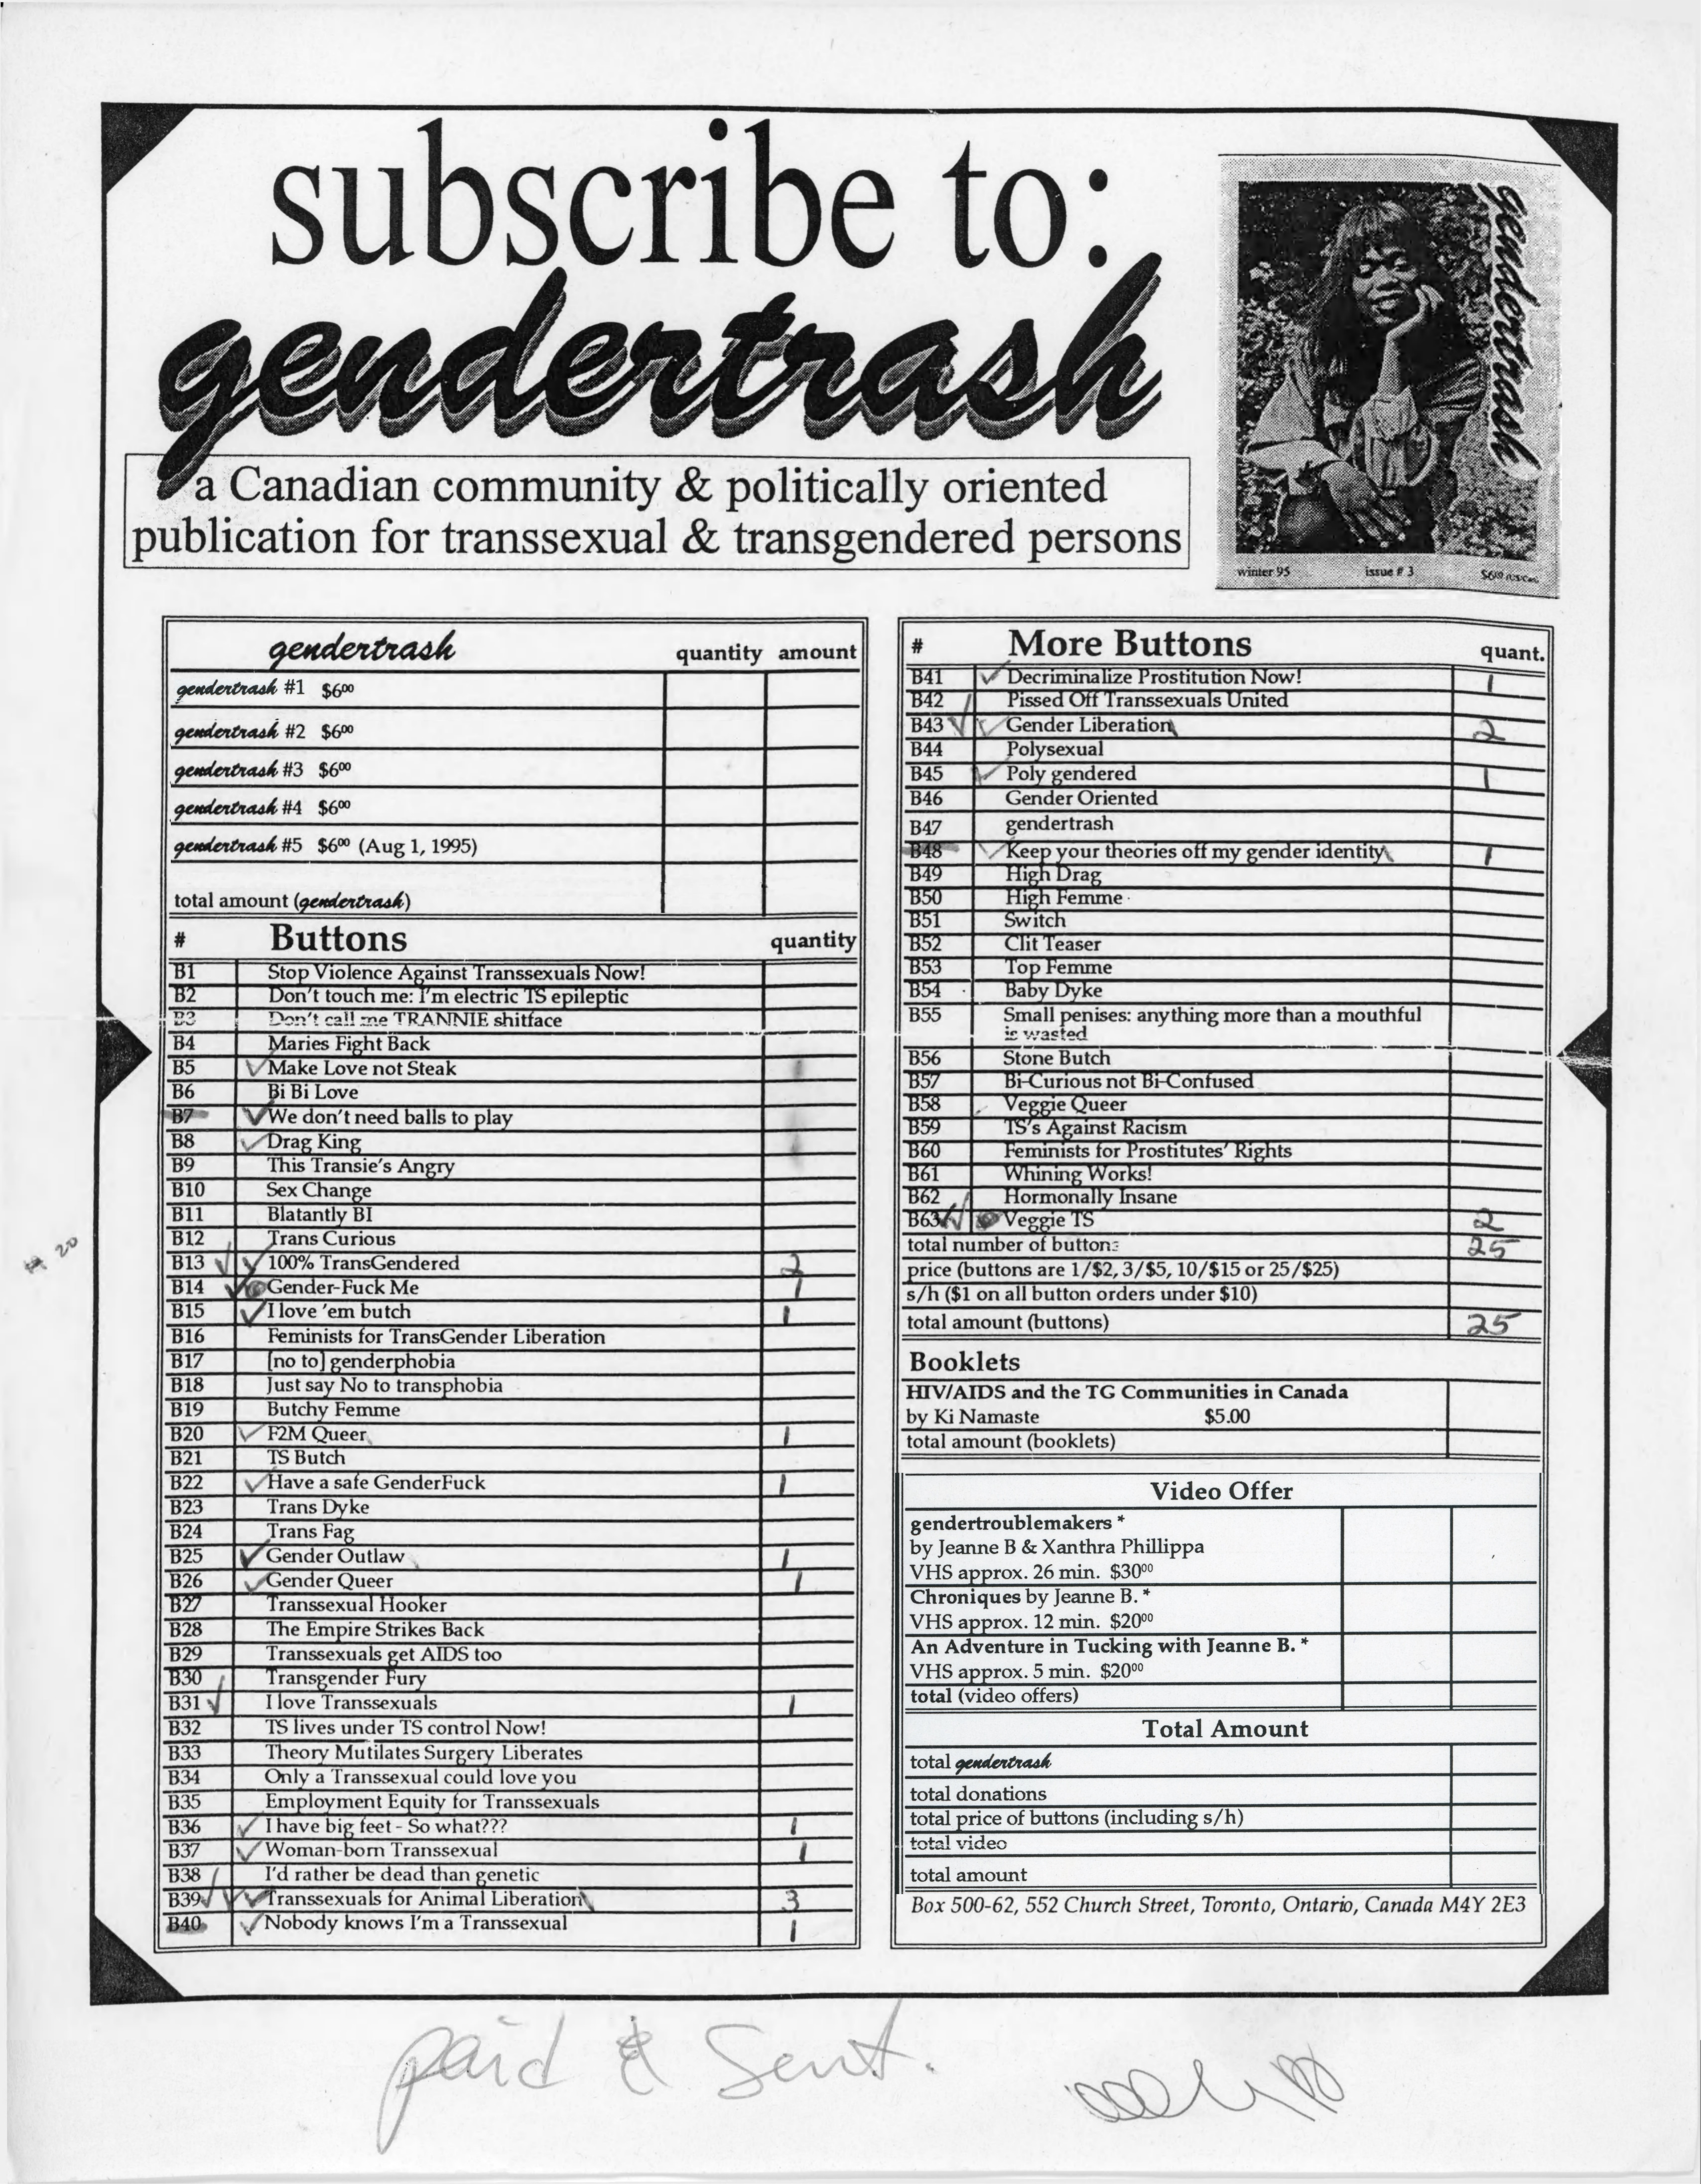 interactive order form as part of _gendertrash_ exhibition, The ArQuives Digital Collections